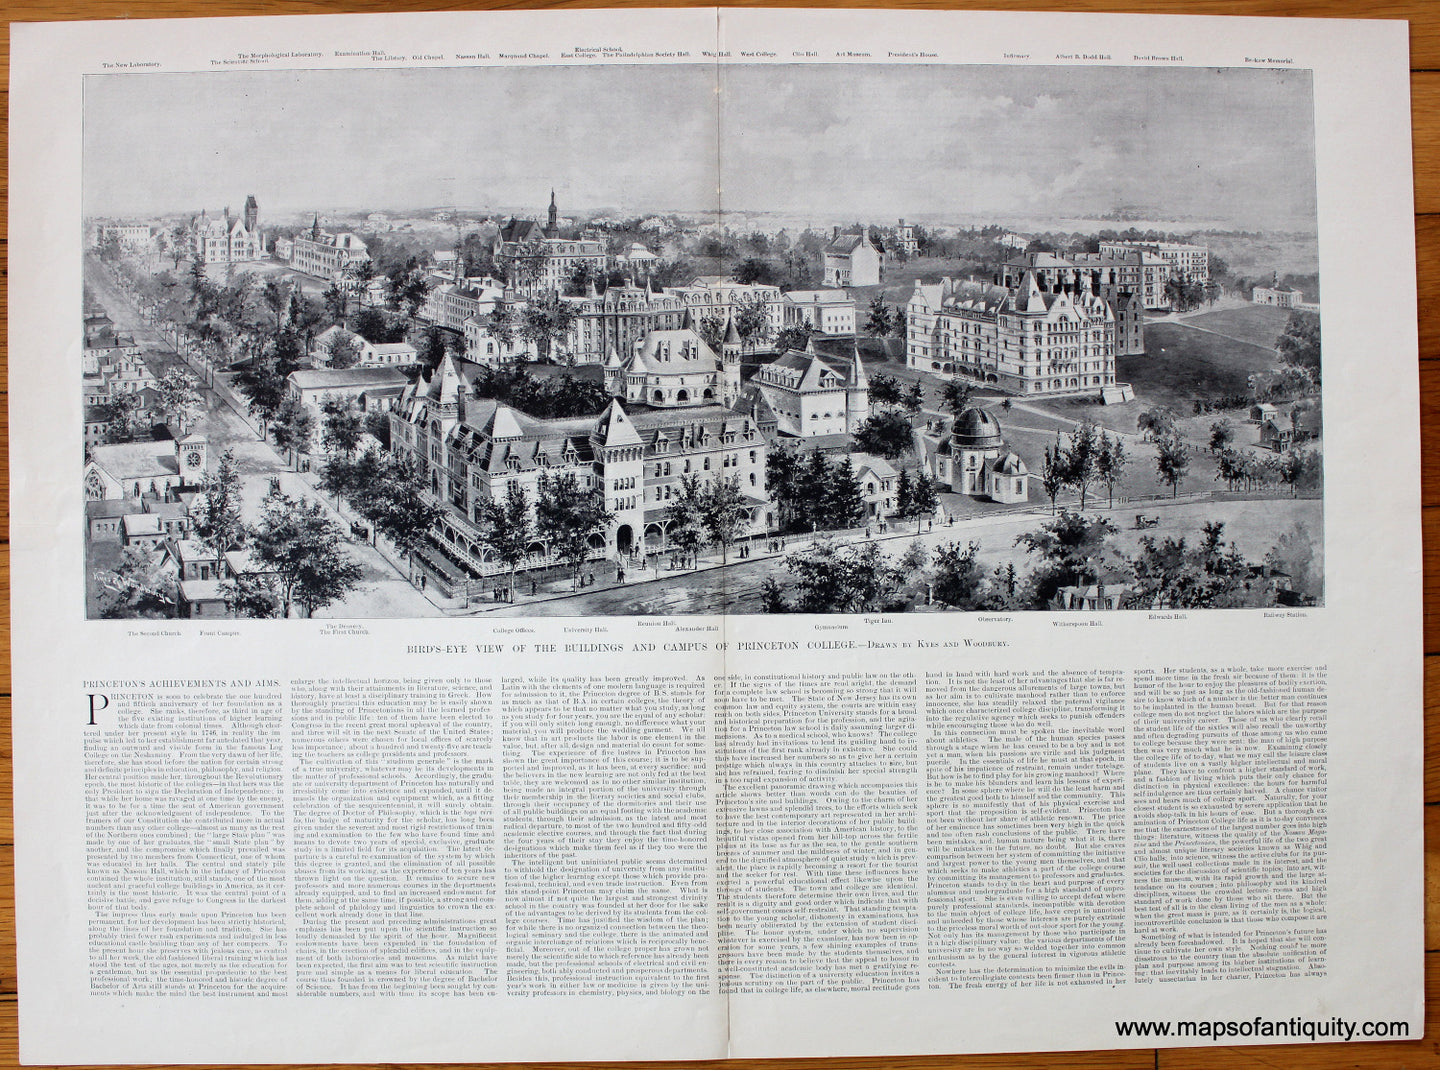 Uncolored-Antique-Illustration-Bird's-Eye-View-of-the-Buildings-and-Campus-of-Princeton-College-**********-College---1896-Harper's-Weekly-Maps-Of-Antiquity